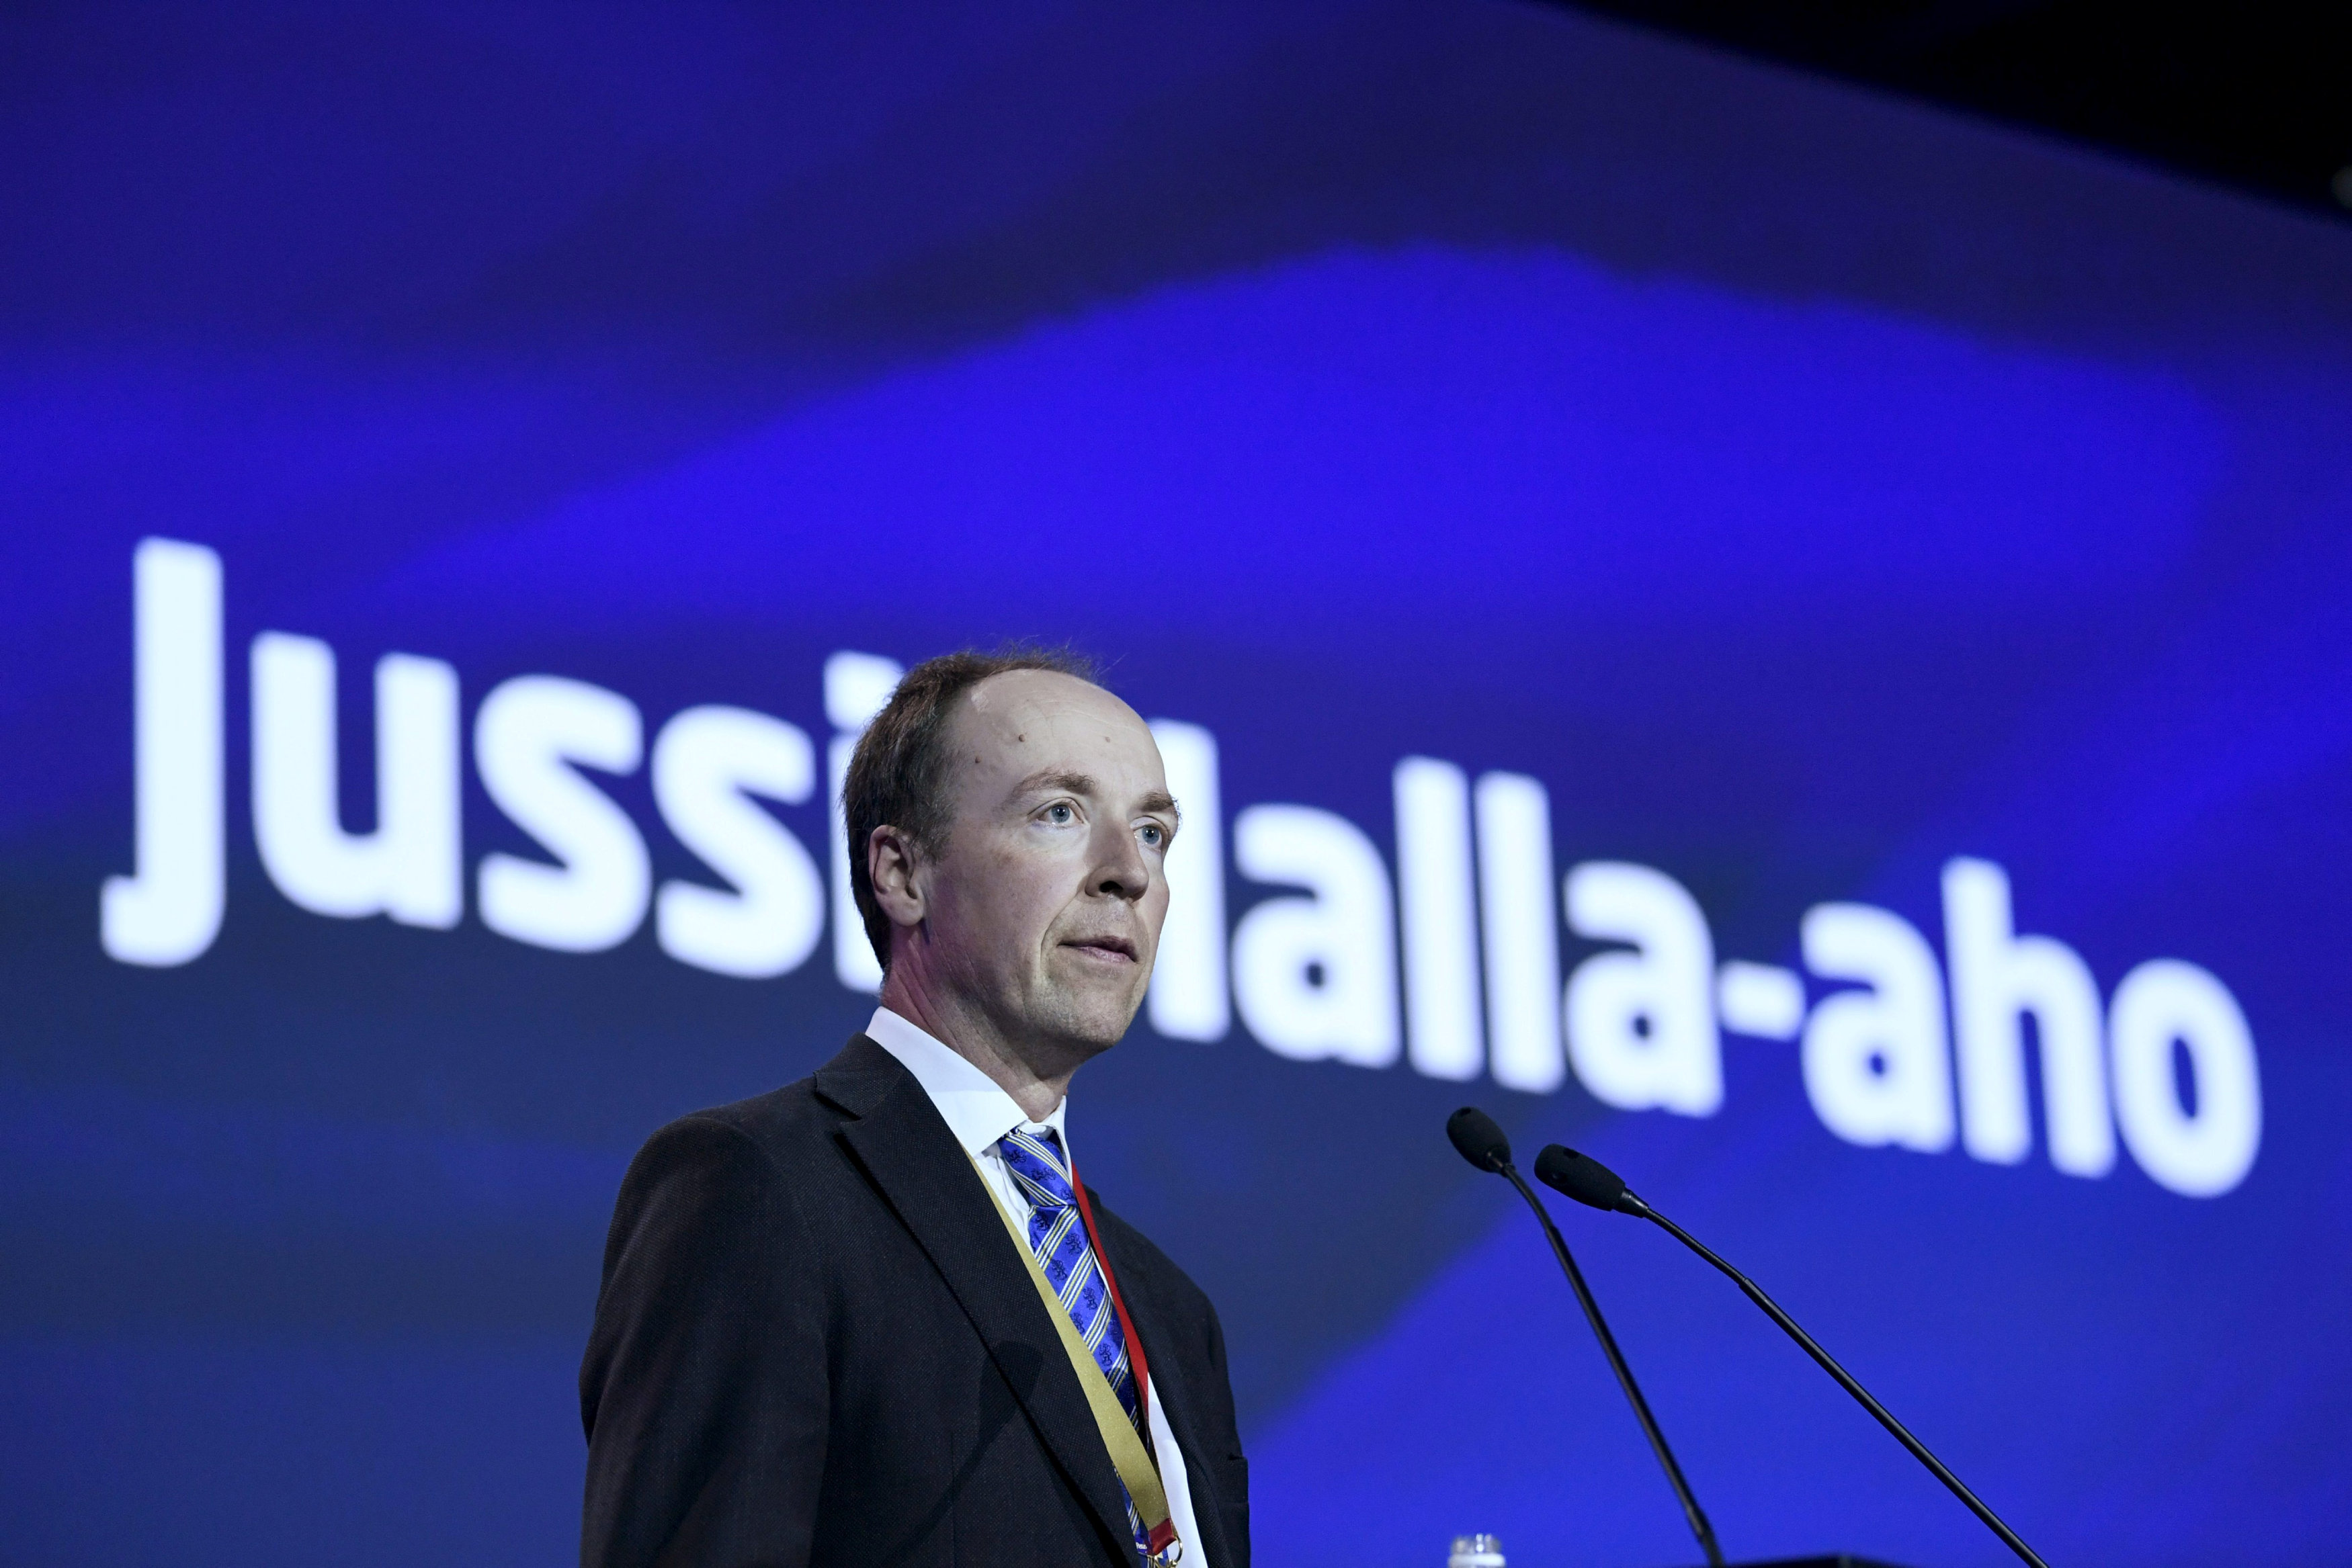 Newley-elected chairman of the Finns Party and Member of the European Parliament Jussi Halla-aho delivers his speech at the Finns Party congress in Jyvaskyla, Finland June 11, 2017. (LEHTIKUVA/Jussi Nukari via Reuters)